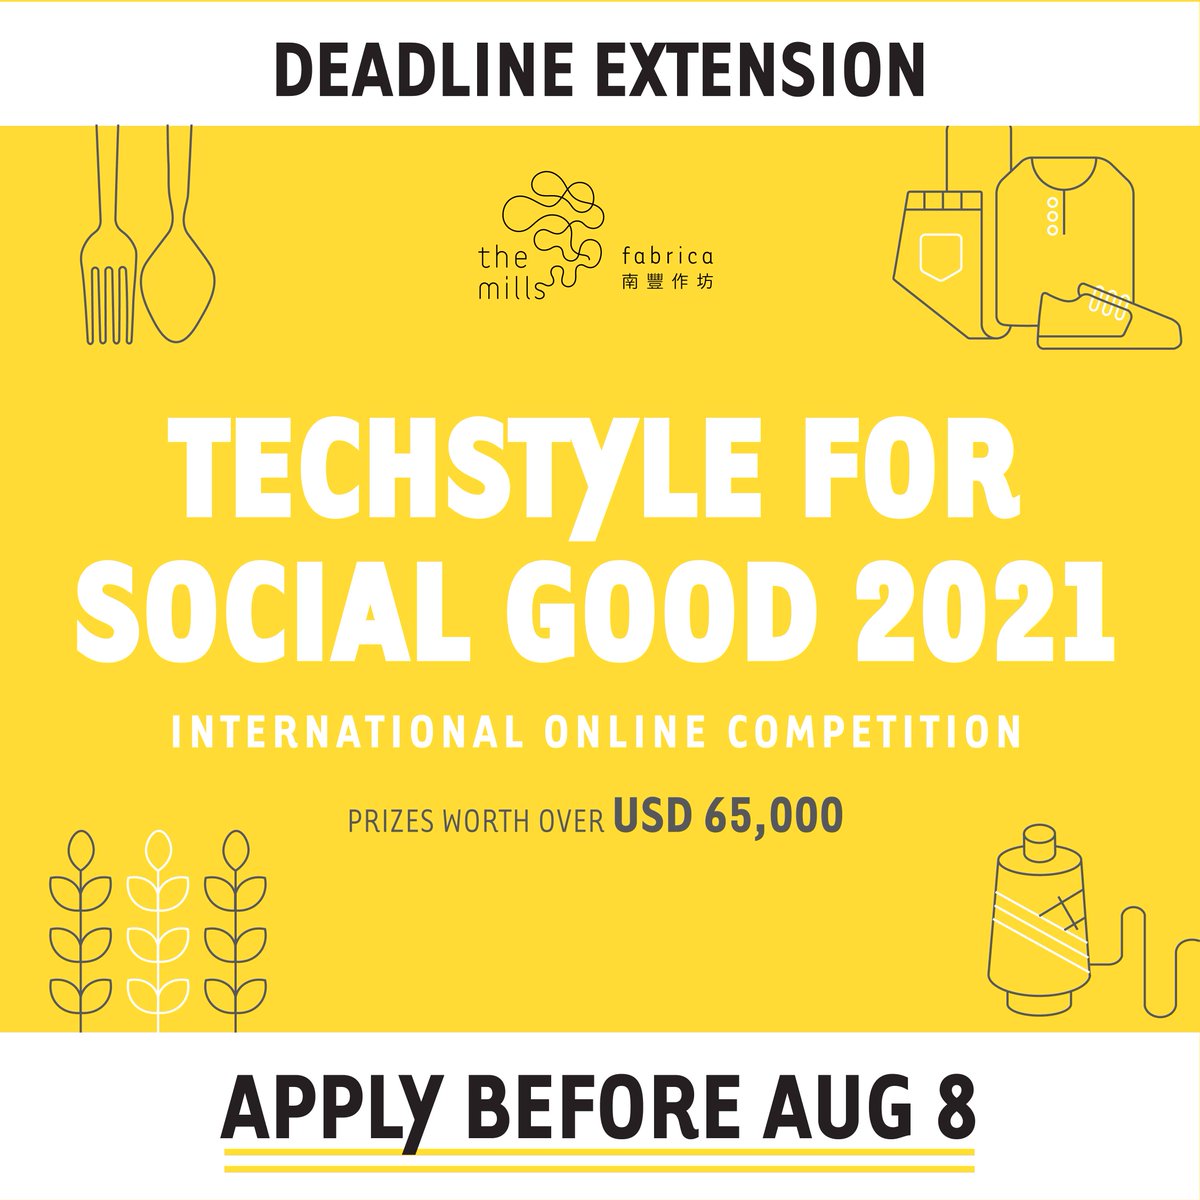 Applications for the @themillsfabrica TechStyle For Social Good competition close in 1 week. The deadline is extended to 8 am on 8th August for innovations in apparel, textiles and agrifood tech. Apply now👉 ow.ly/dezO50FIoVq #TechstyleForSocialGood2021 #circulareconomy